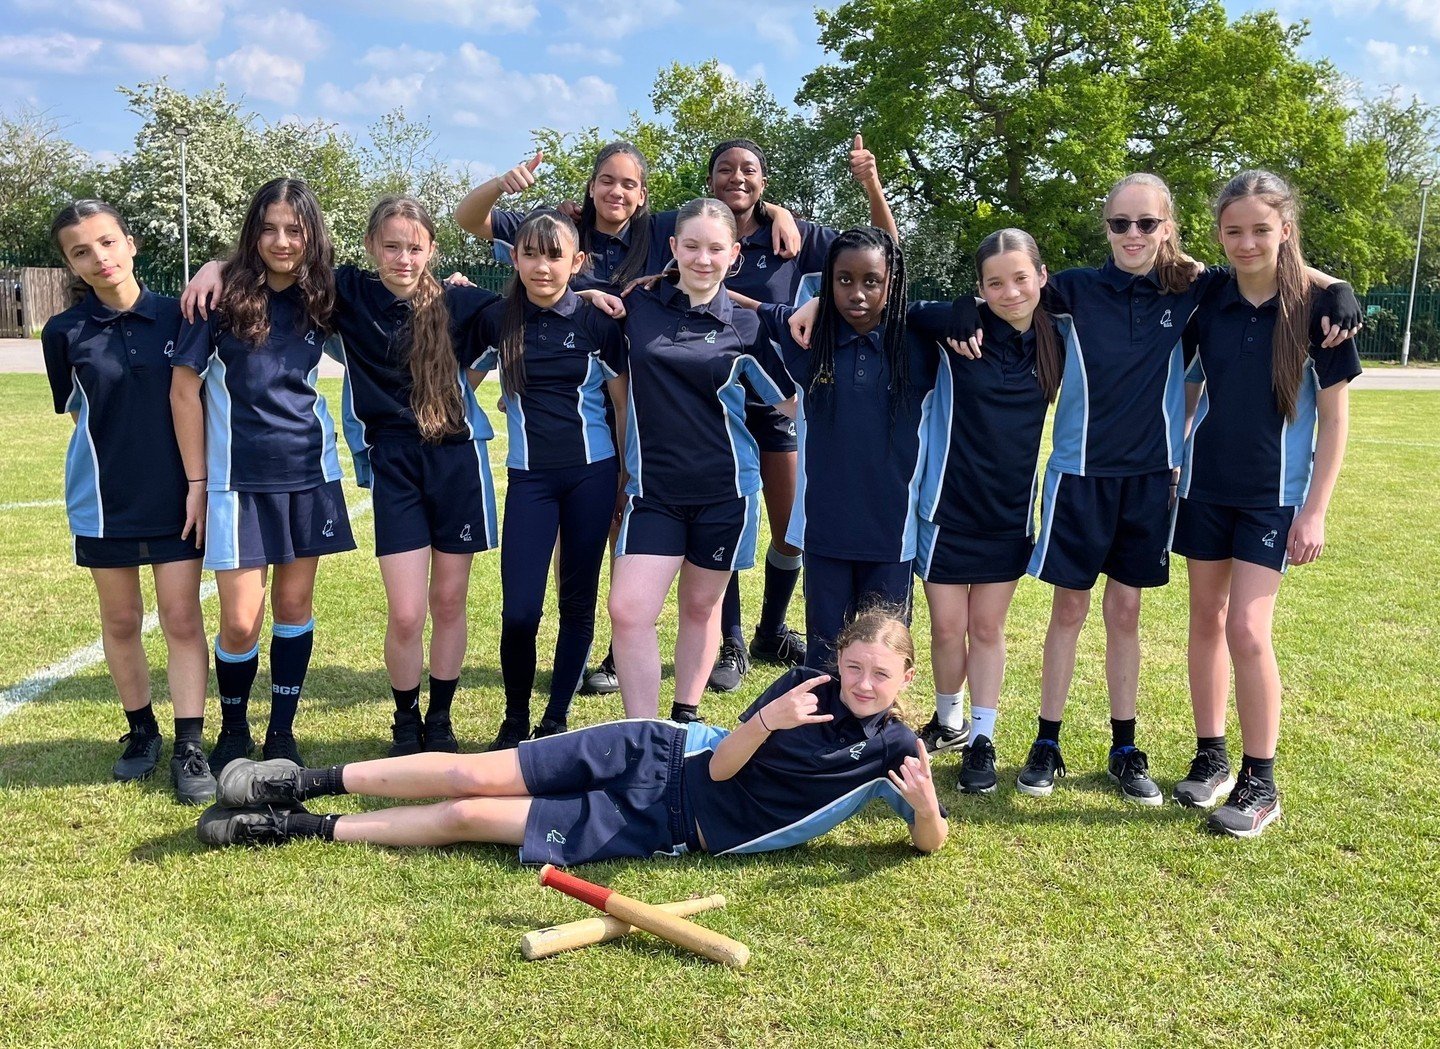 We took two teams across to King Edwards Five Ways to play friendly rounders fixtures after school on Wednesday 8th May. Our Year 7 &amp; 8 team, captained by Jessica L, won 19.5-14.5.  Unfortunately our Year 9 team, captained by Gabbie R lost, but t